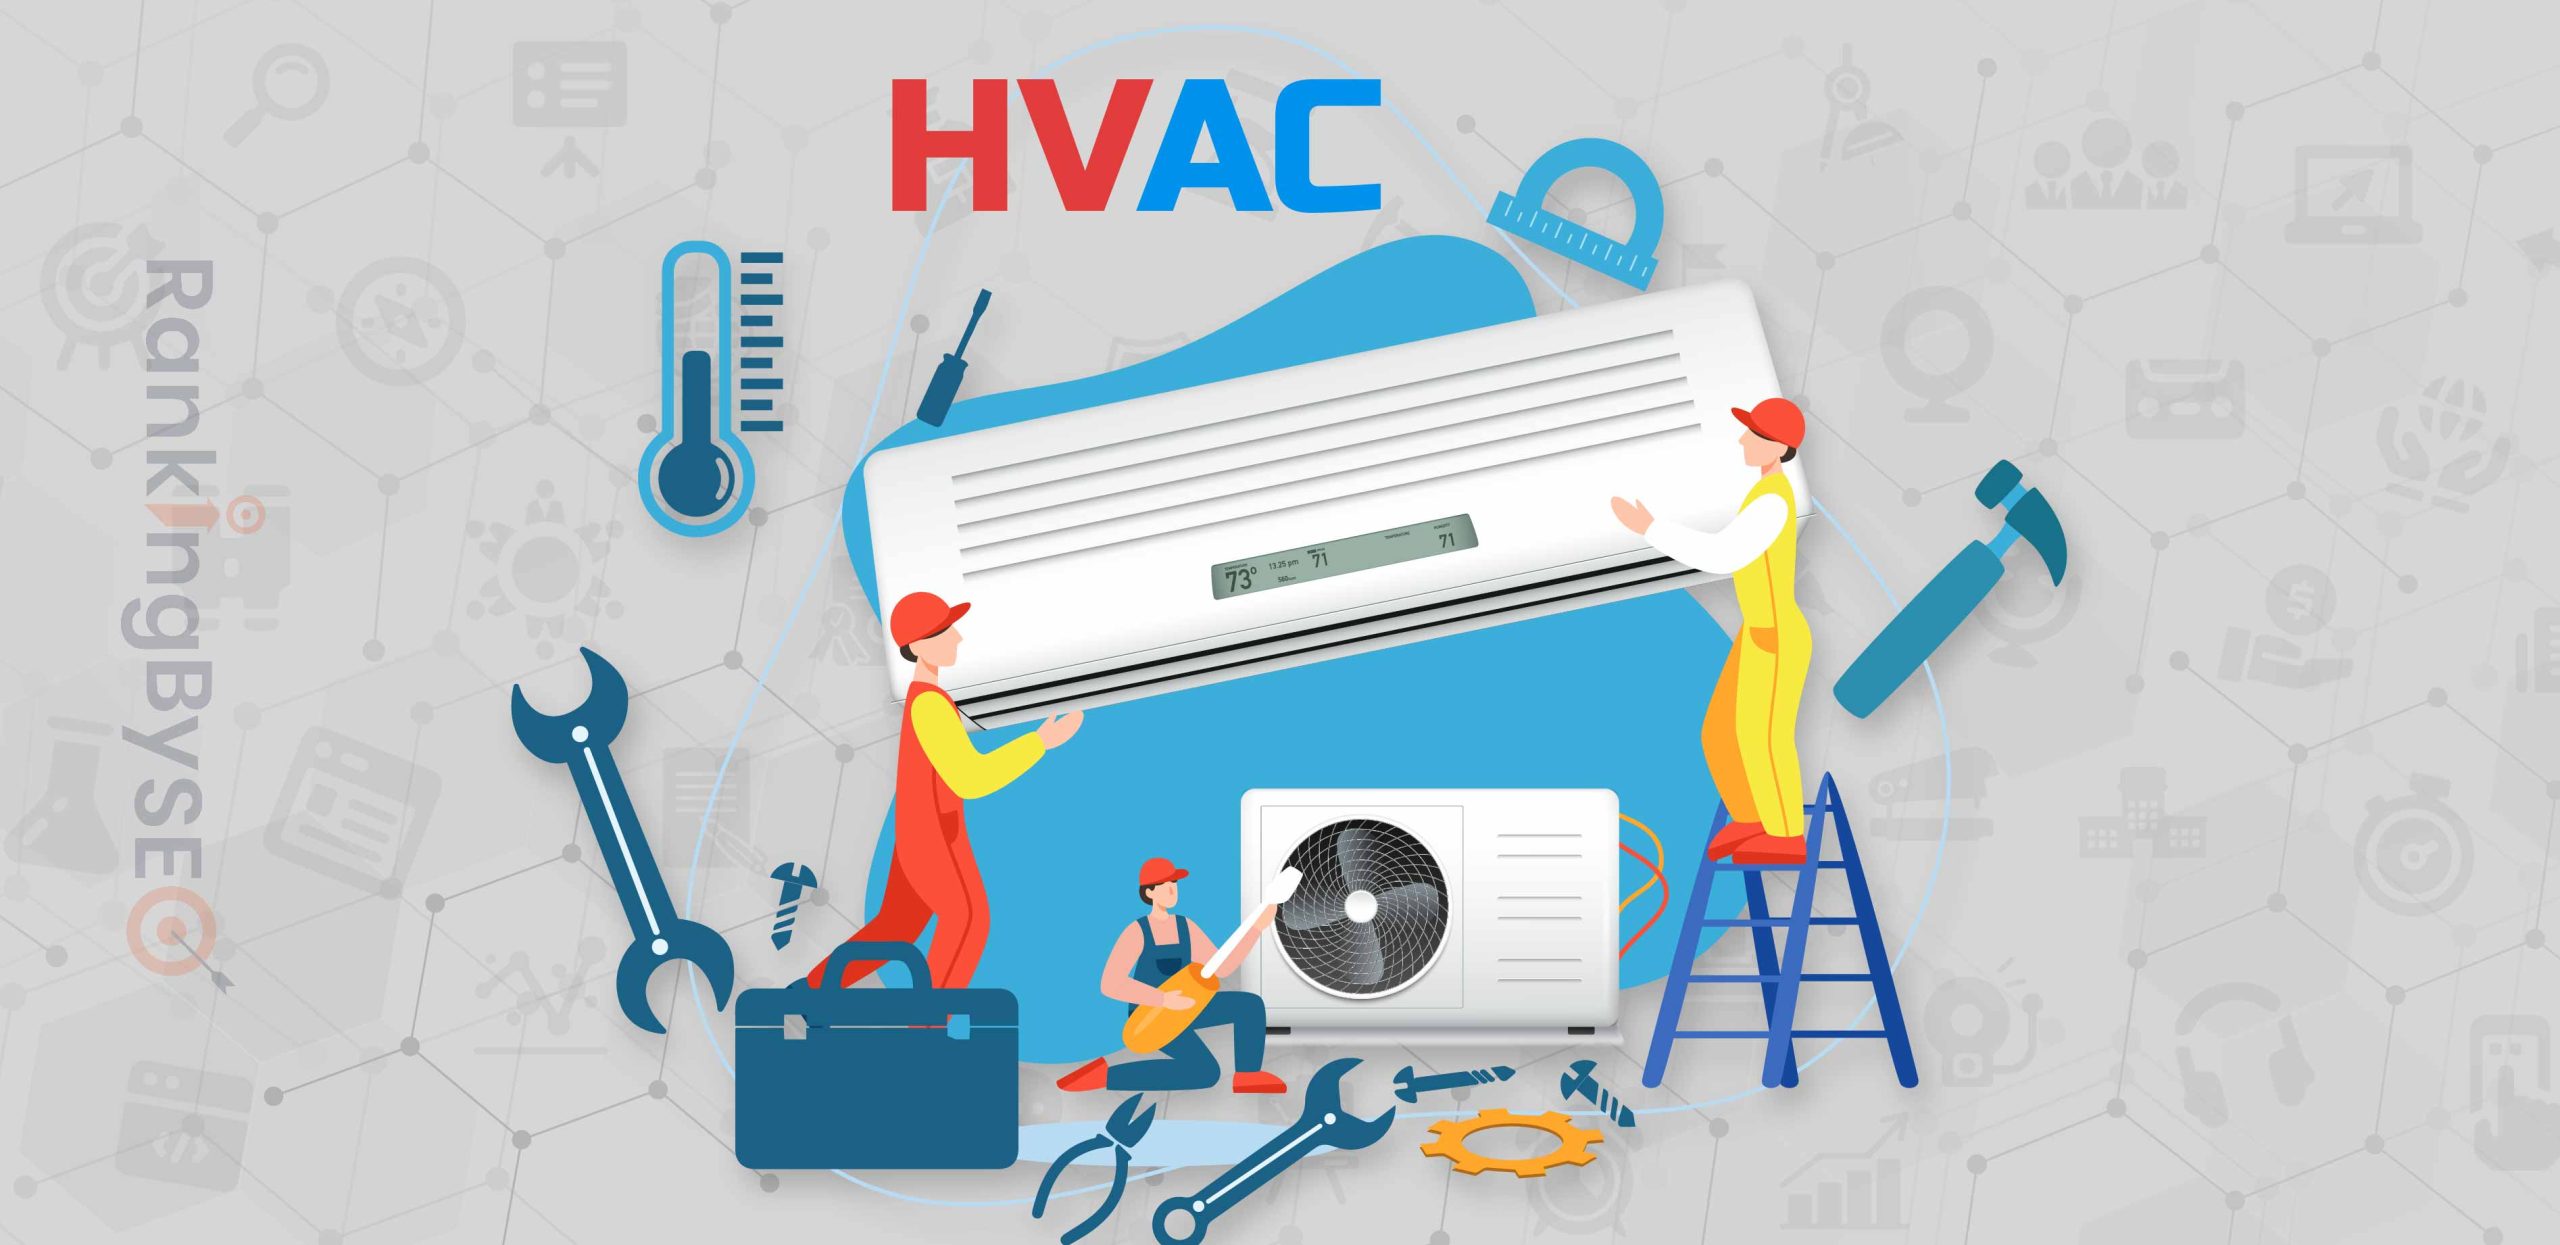 11 In-Depth Steps to Make Your HVAC Marketing Stand Out - Featured Image